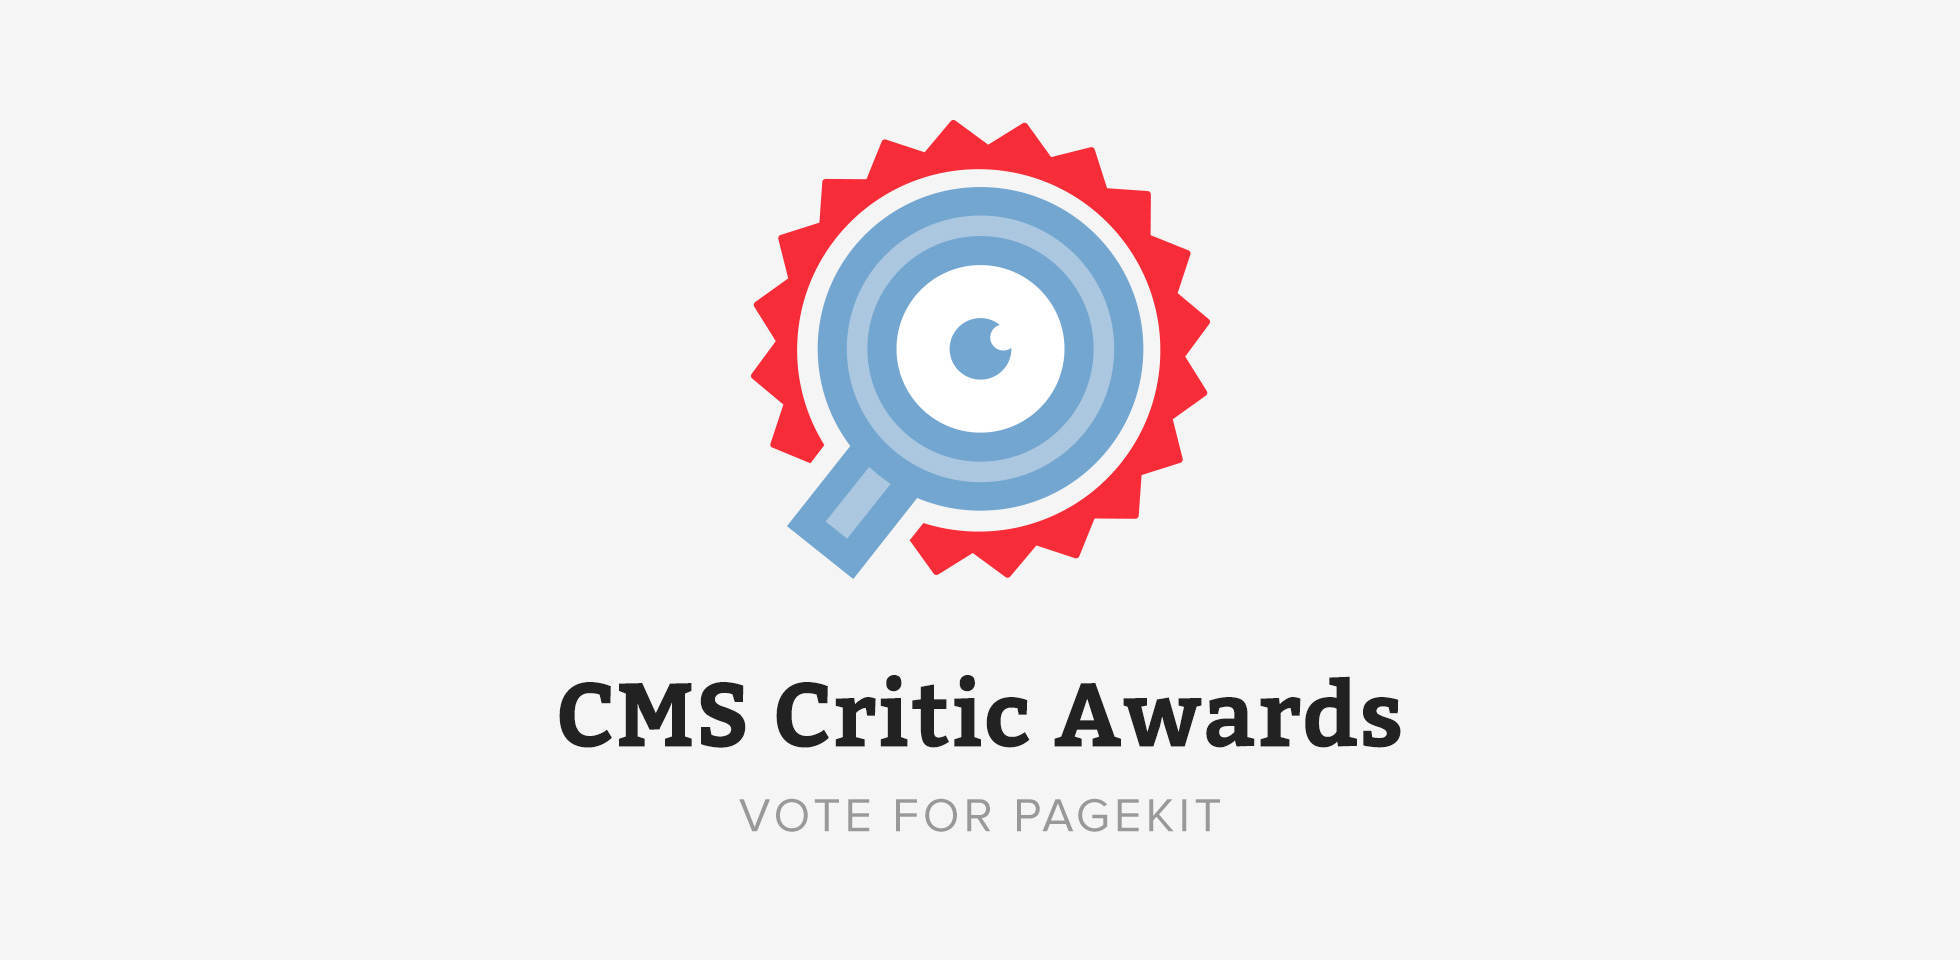 2016 CMS Critic Award Voting has started